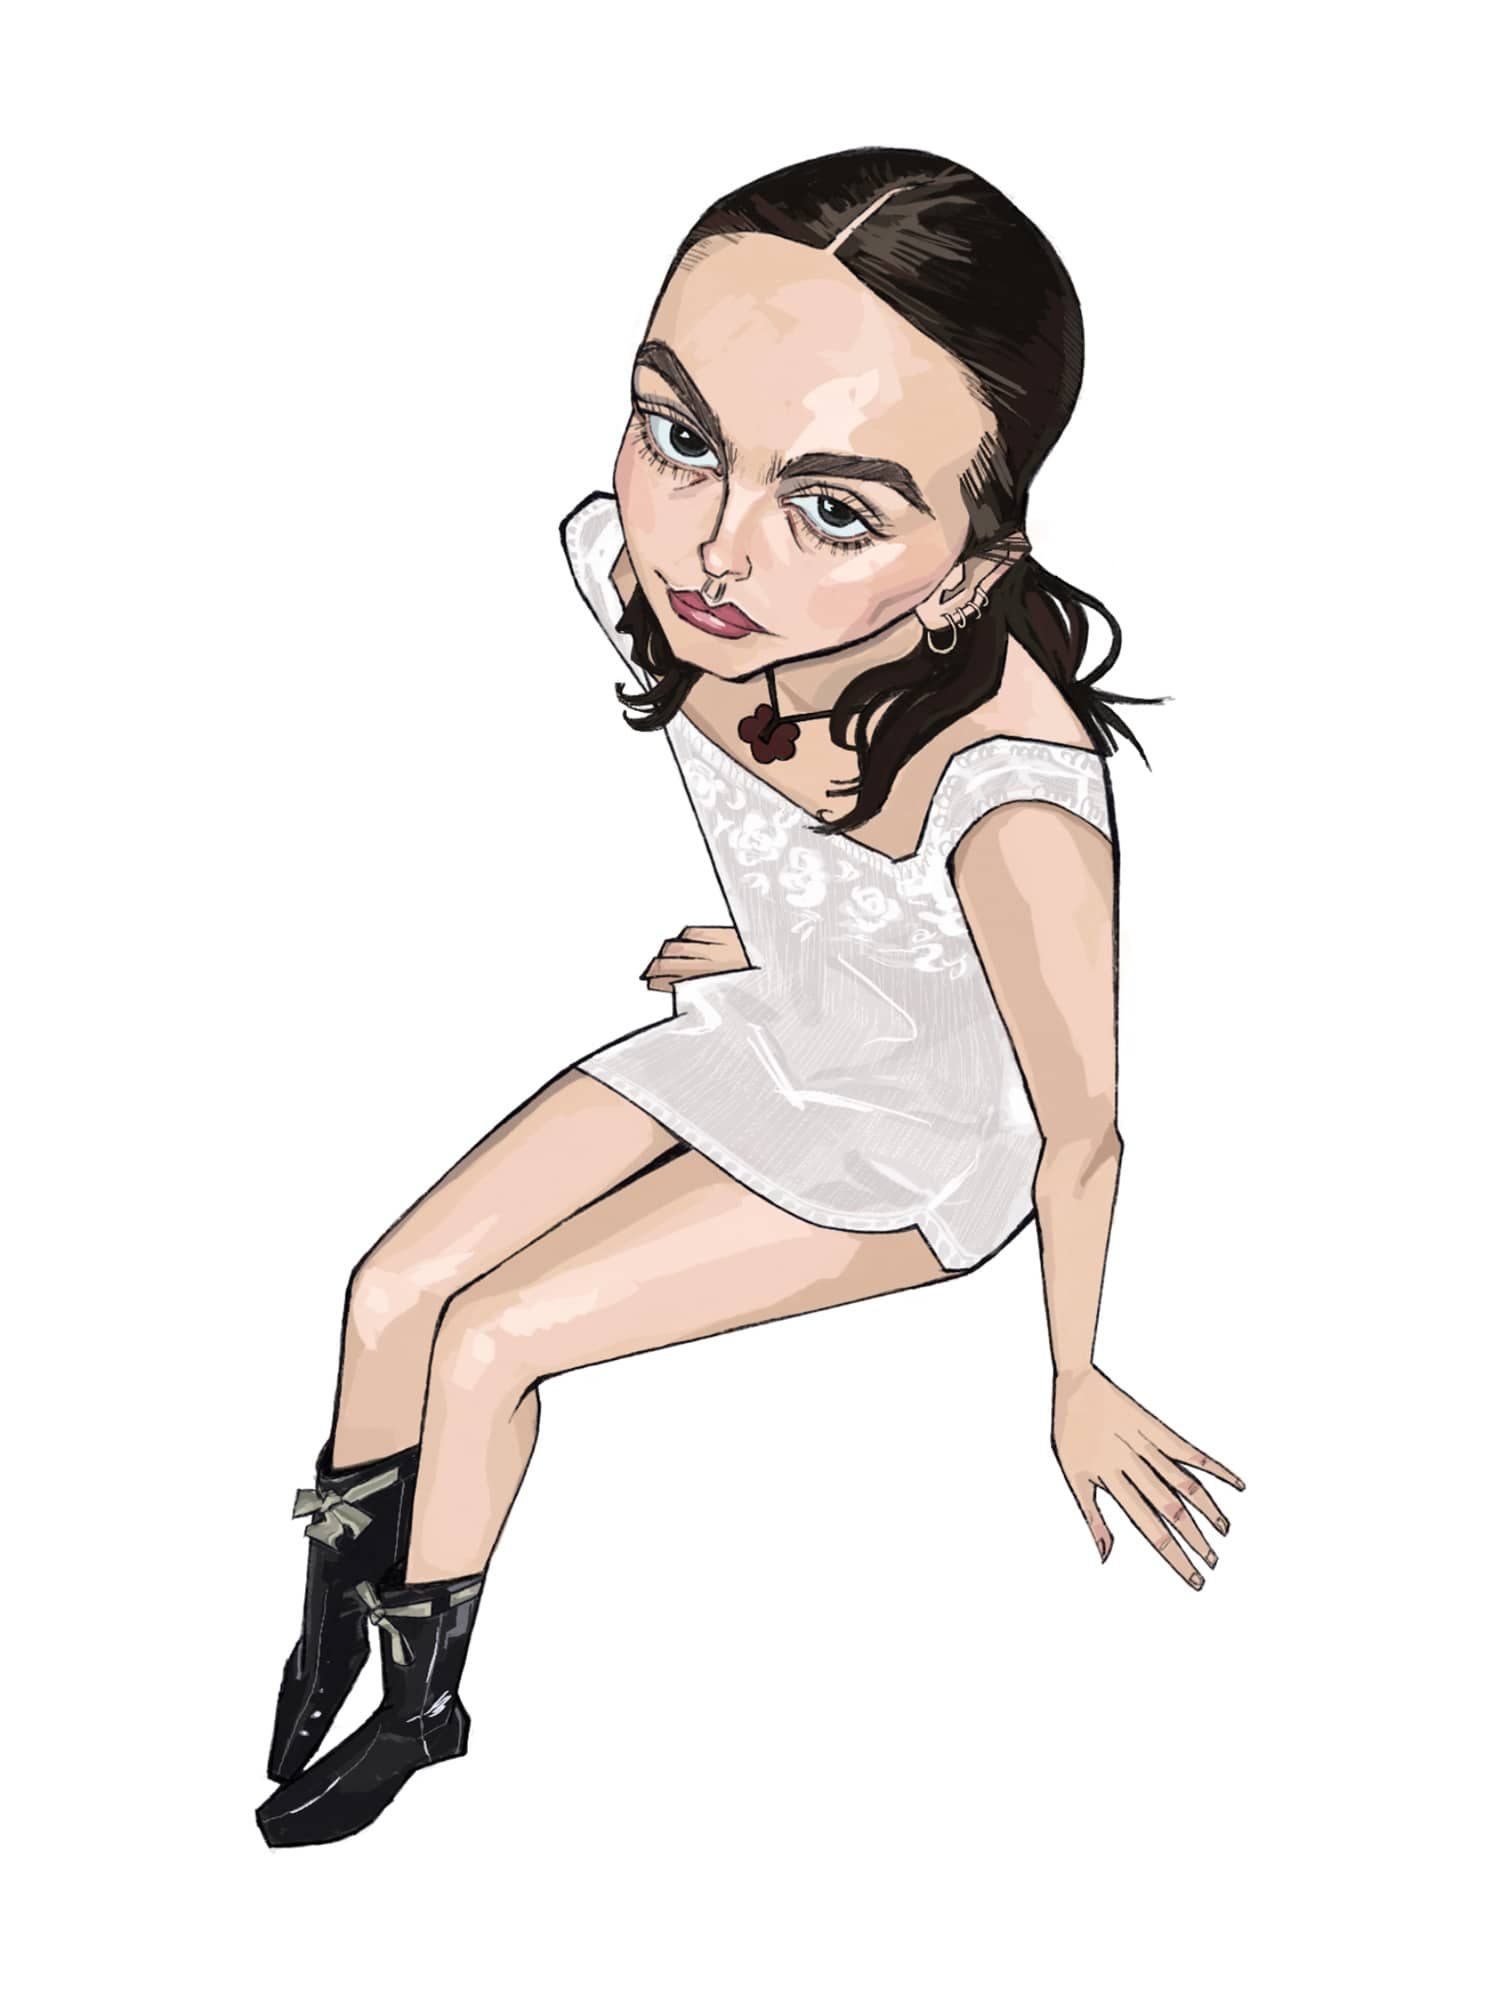 Digital illustration of girl in a white dress and black boots from a high perspective angle